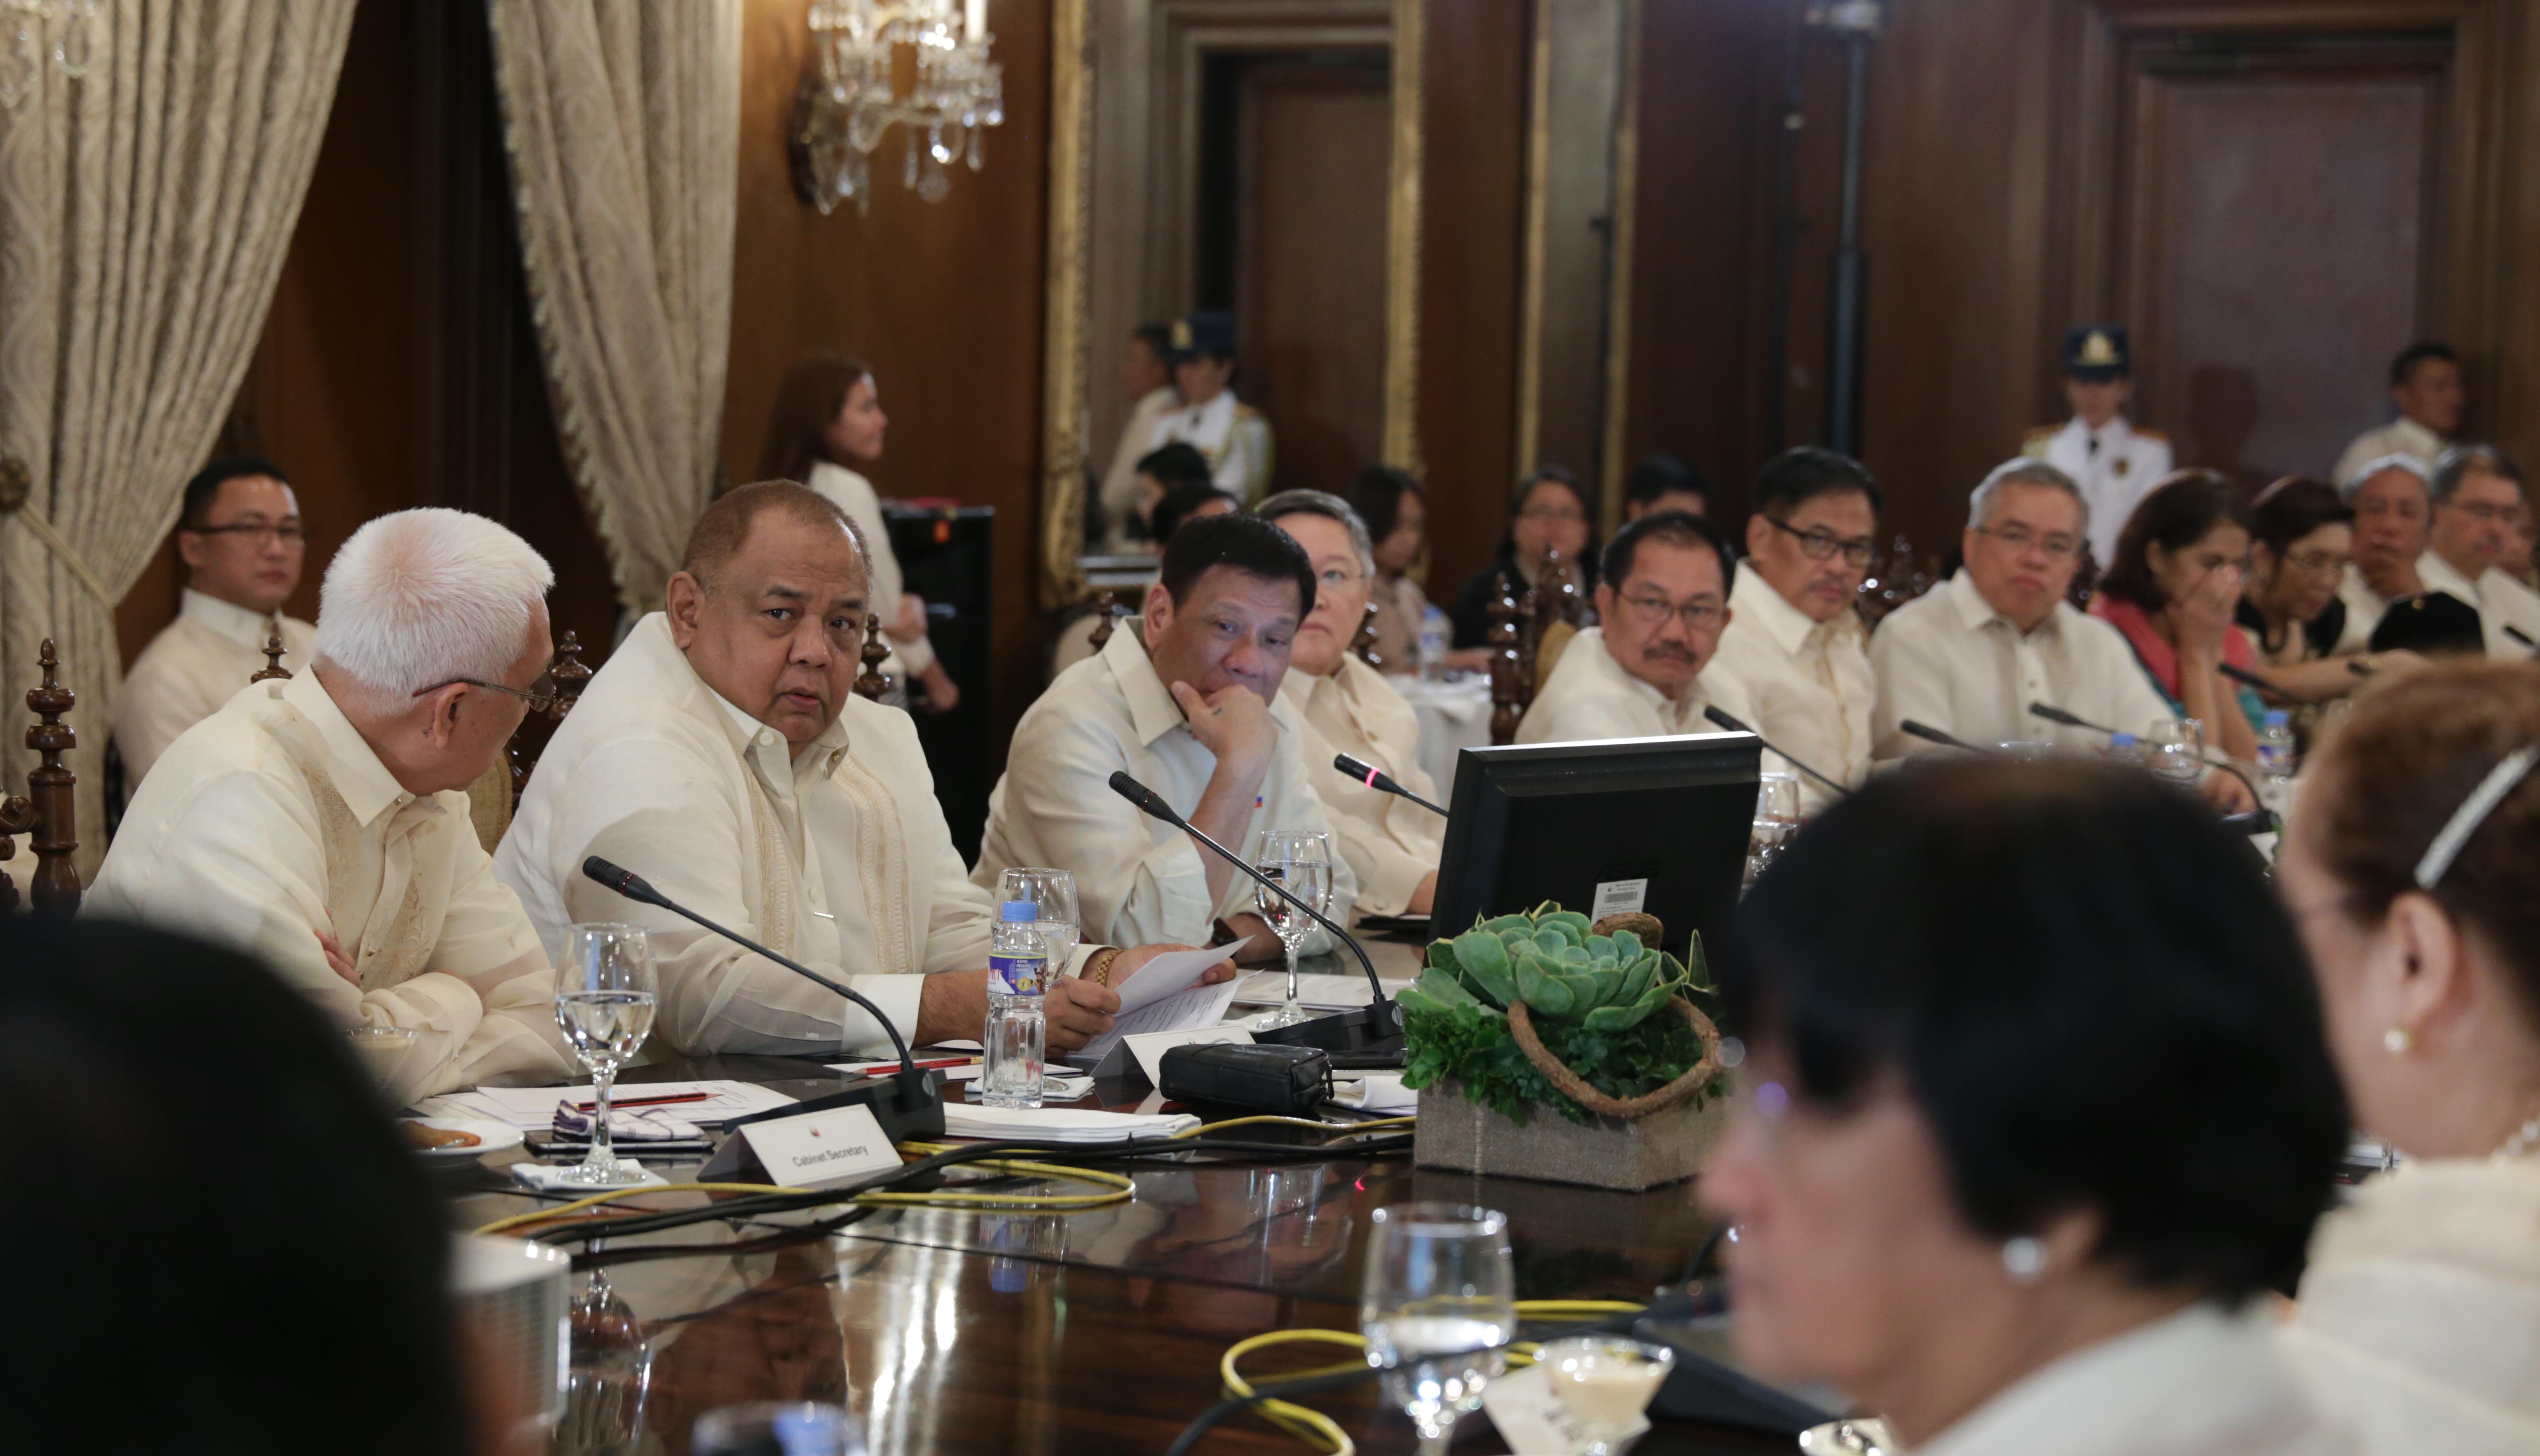 CABINET MEETING. File photo of President Rodrigo Roa Duterte with his Cabinet at the Aguinaldo State Dining Room of Malacañang Palace.   